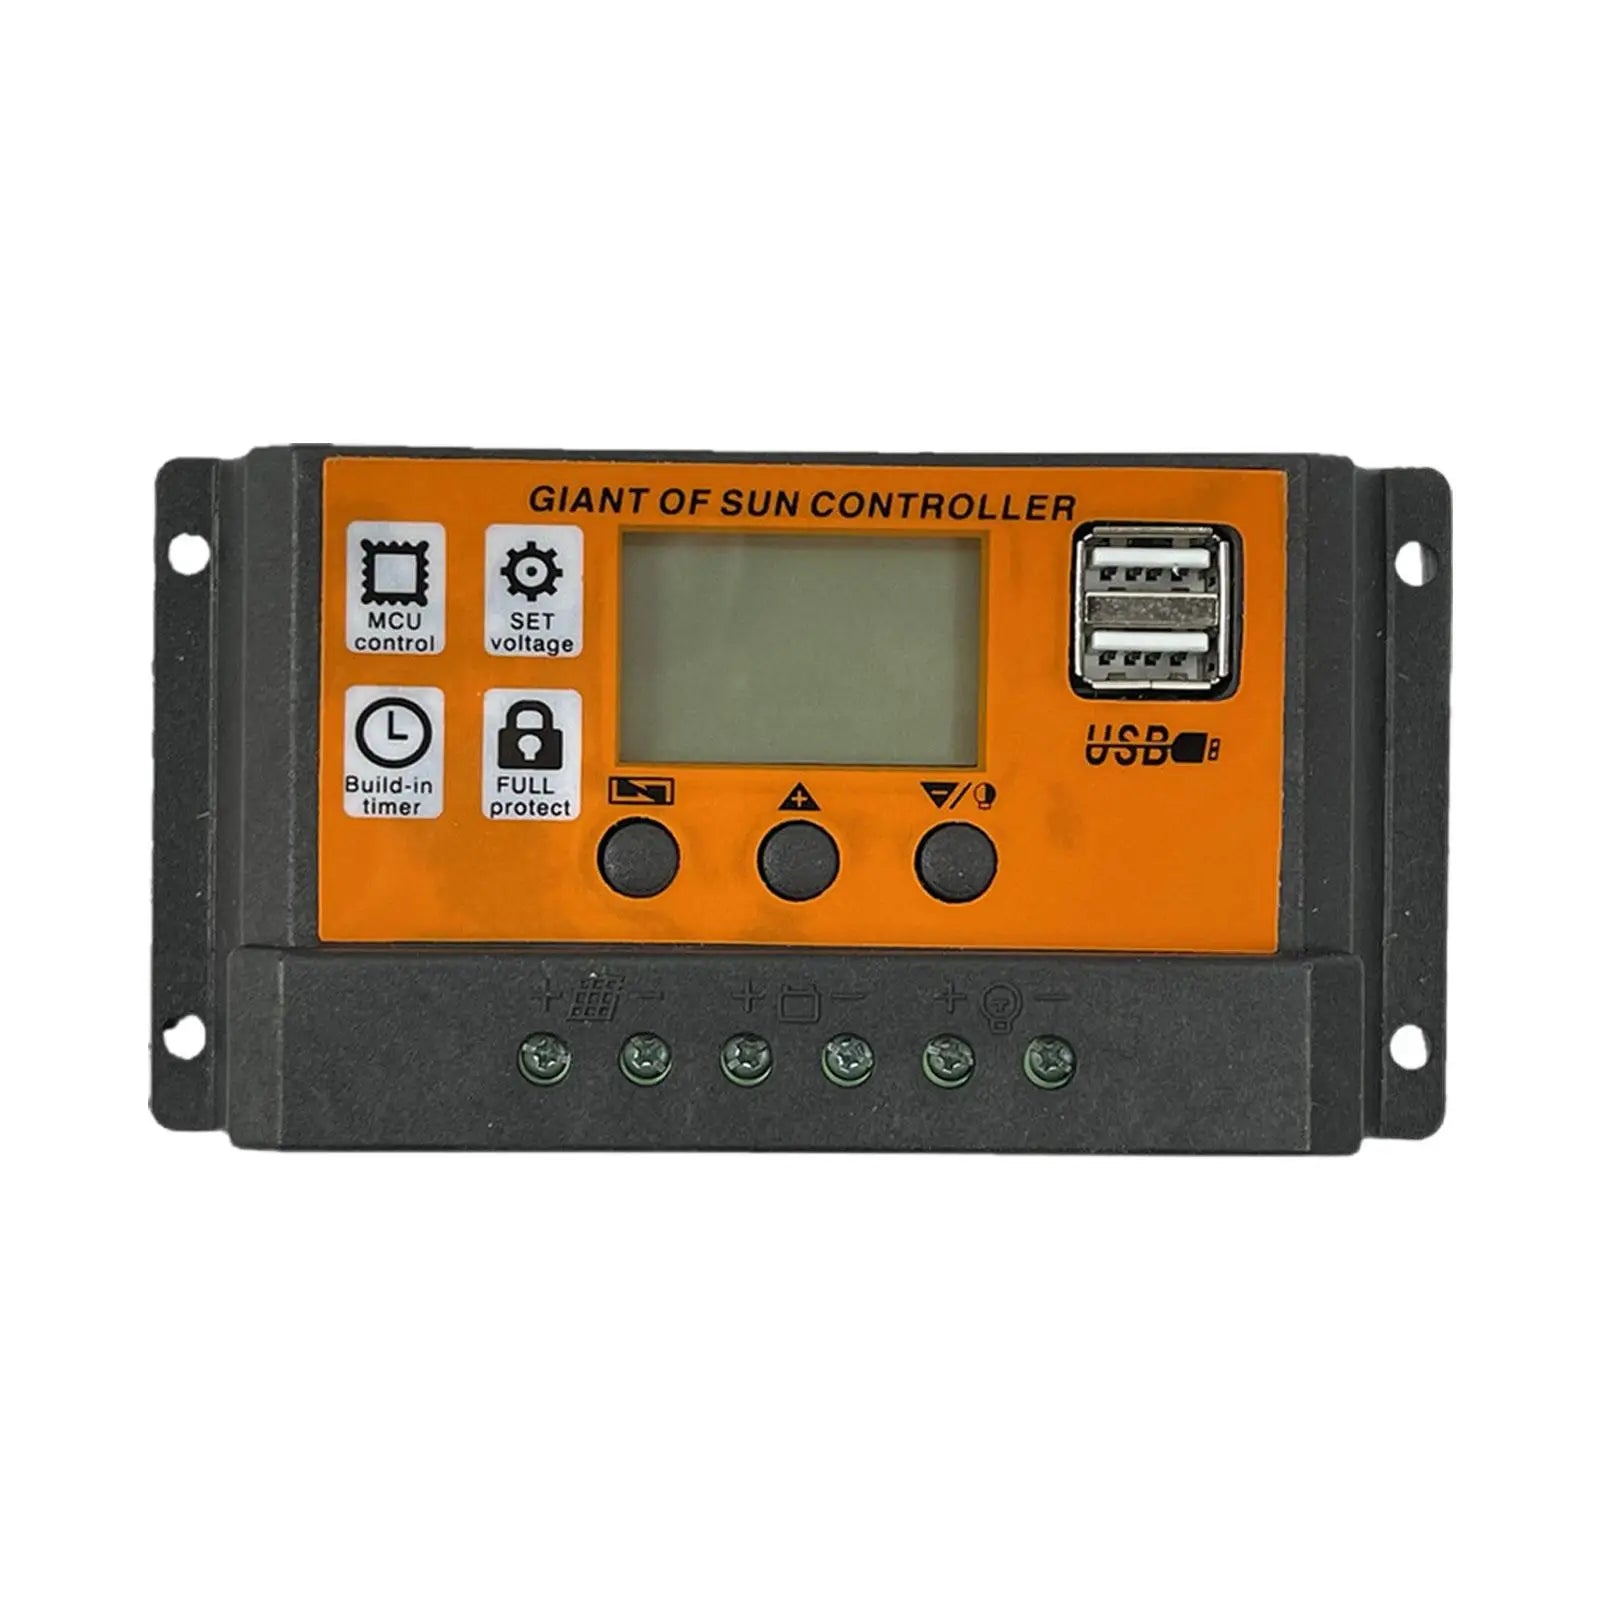 MPPT Solar Charge Controller, Solar charge controller with timer and overcharge protection, controlling voltage and connecting via USB.